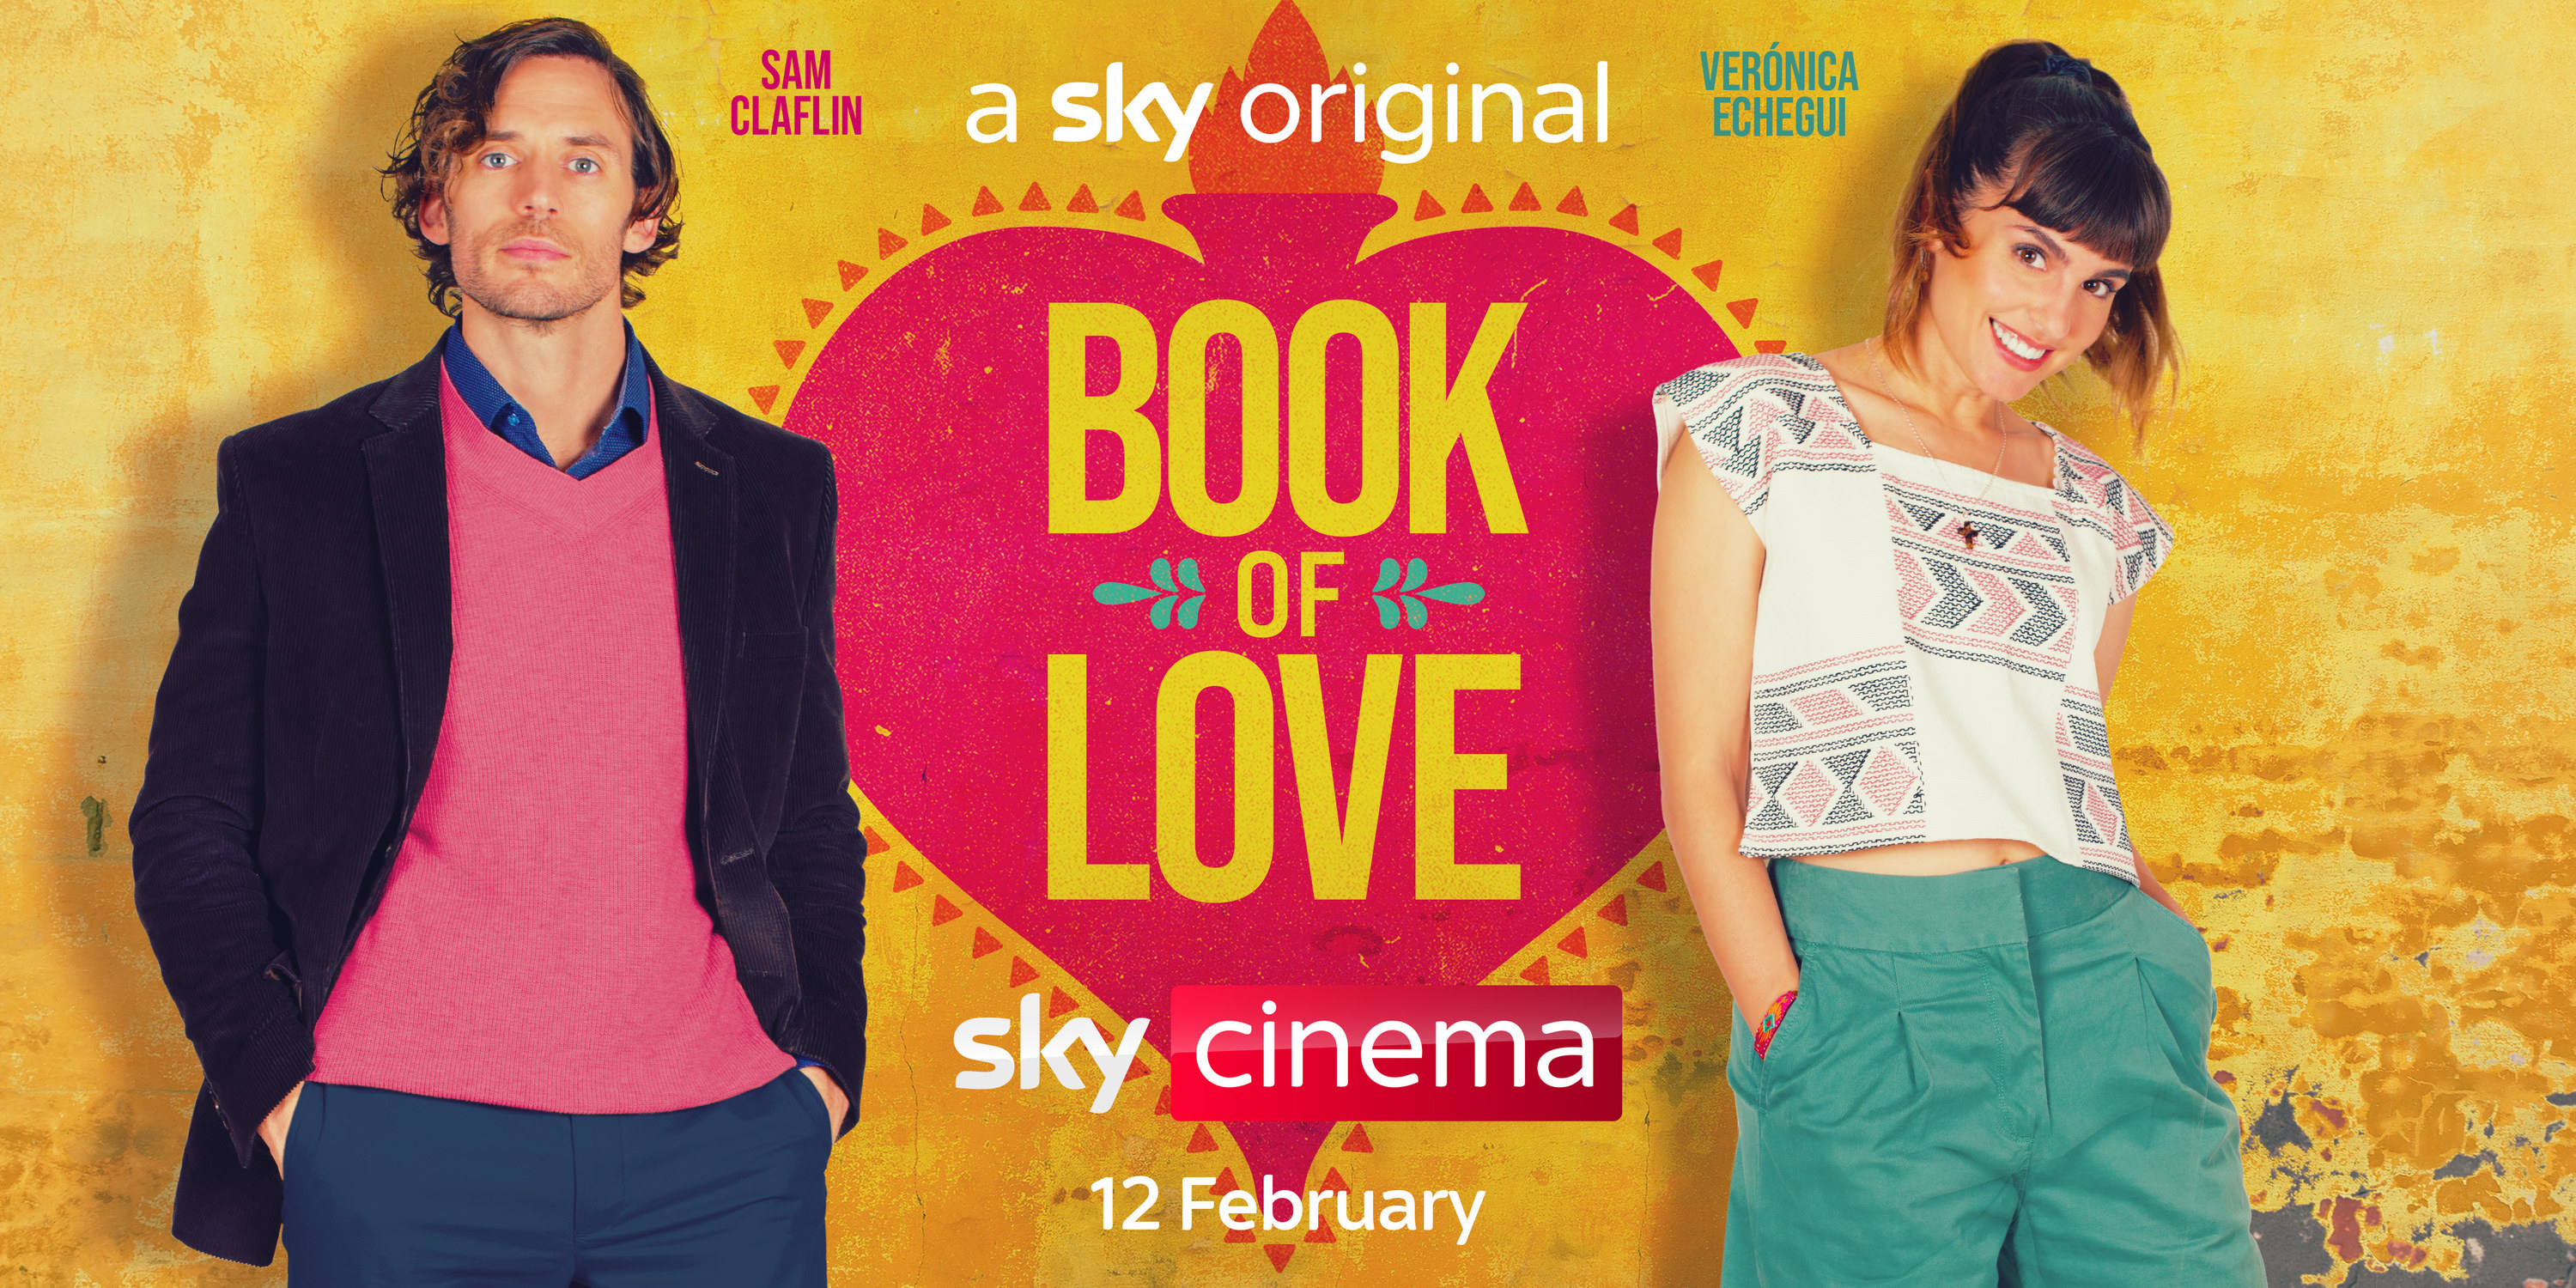 sam claflin and verónica echegui next to each other with book of love sky cinema written in middle